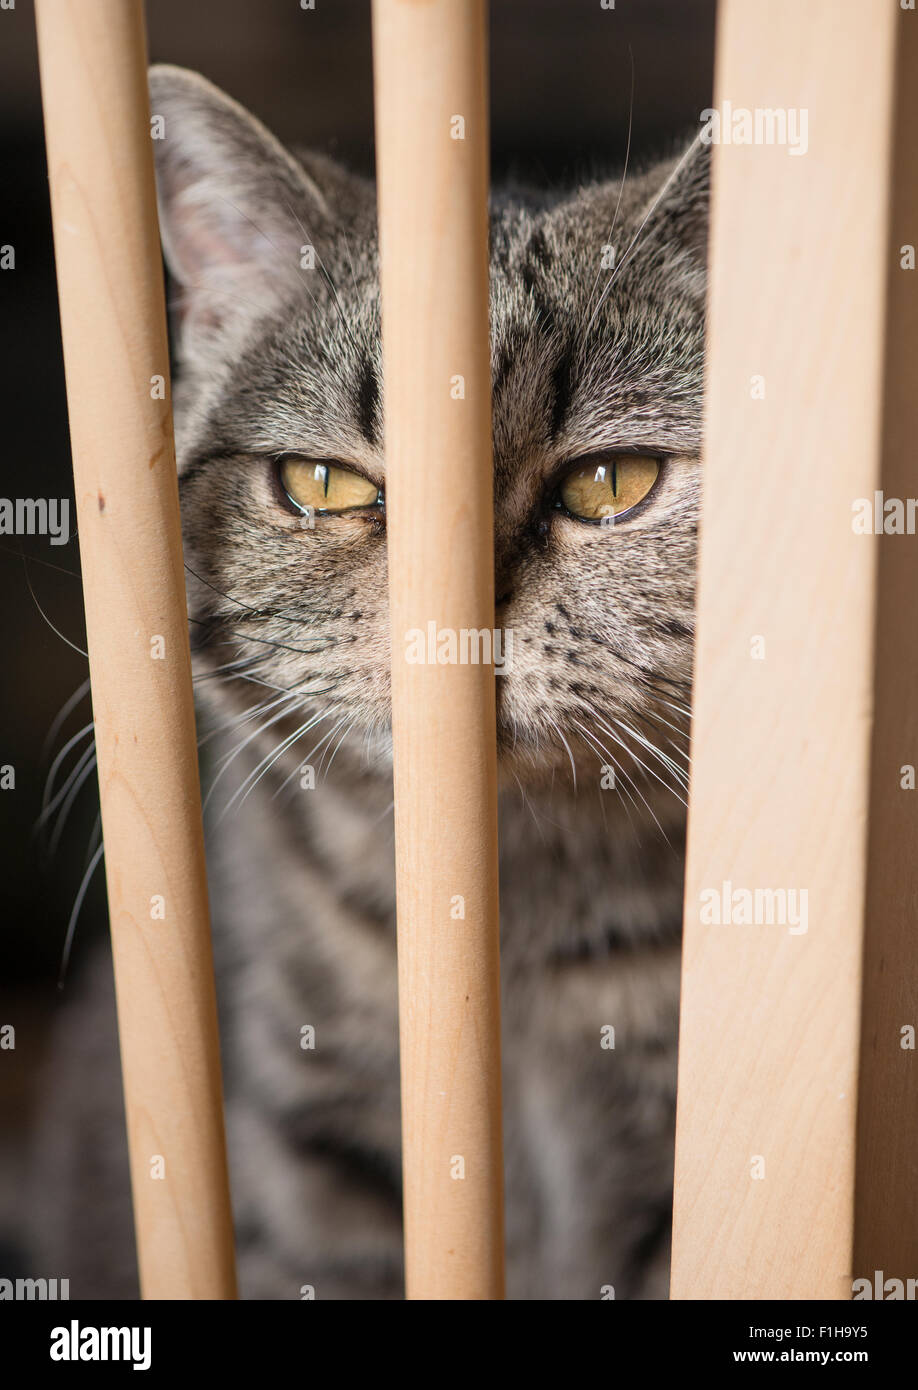 British shorthair cat sitting on chair. Looking away with focus and determination. Stock Photo